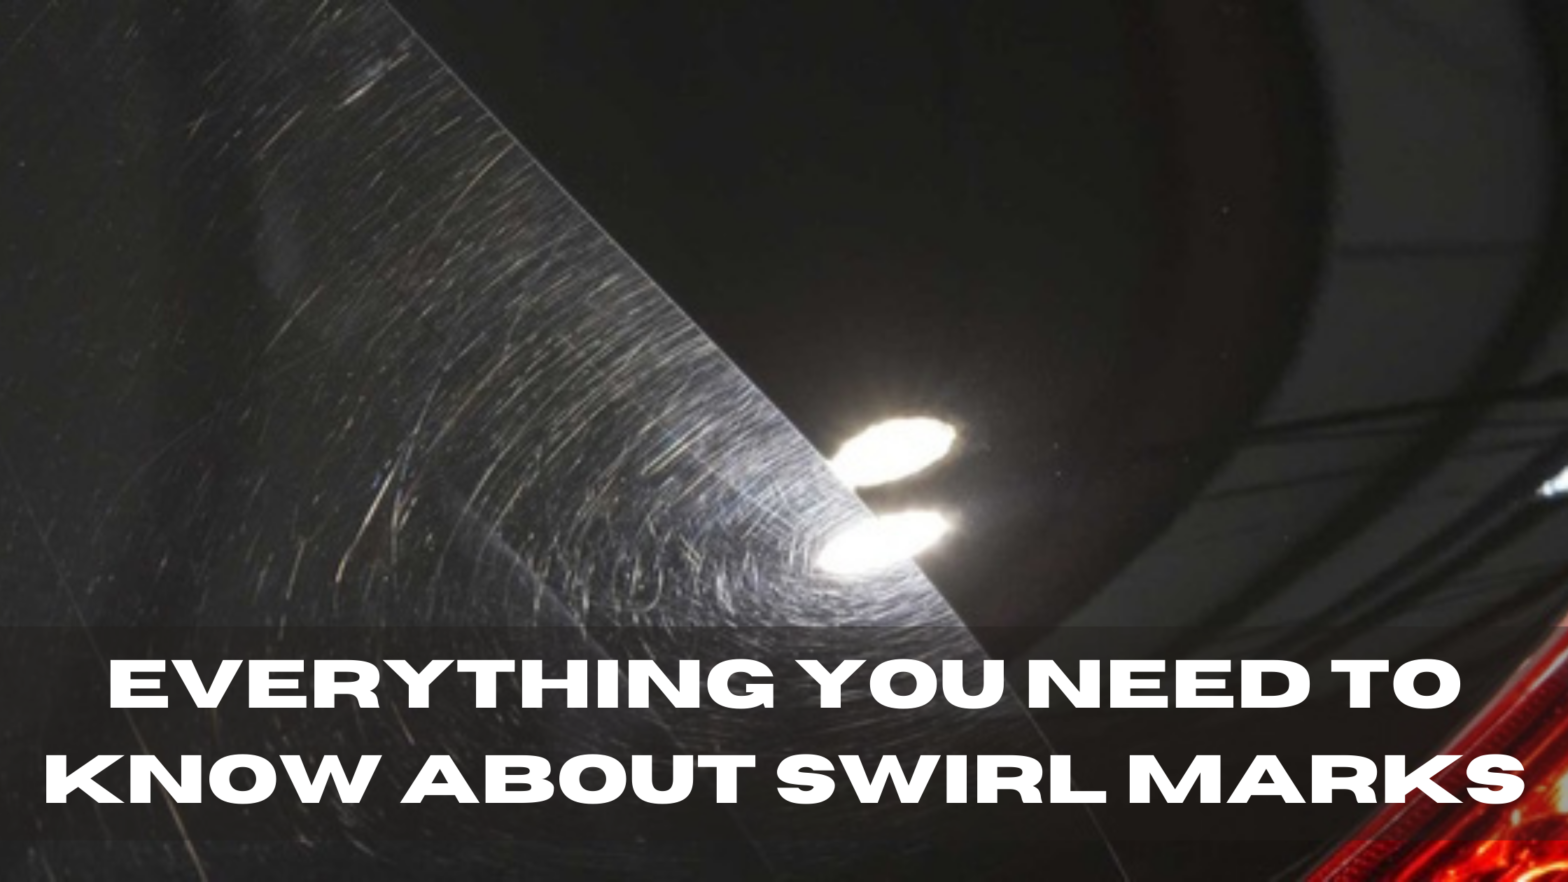 Everything you need to know about swirl marks